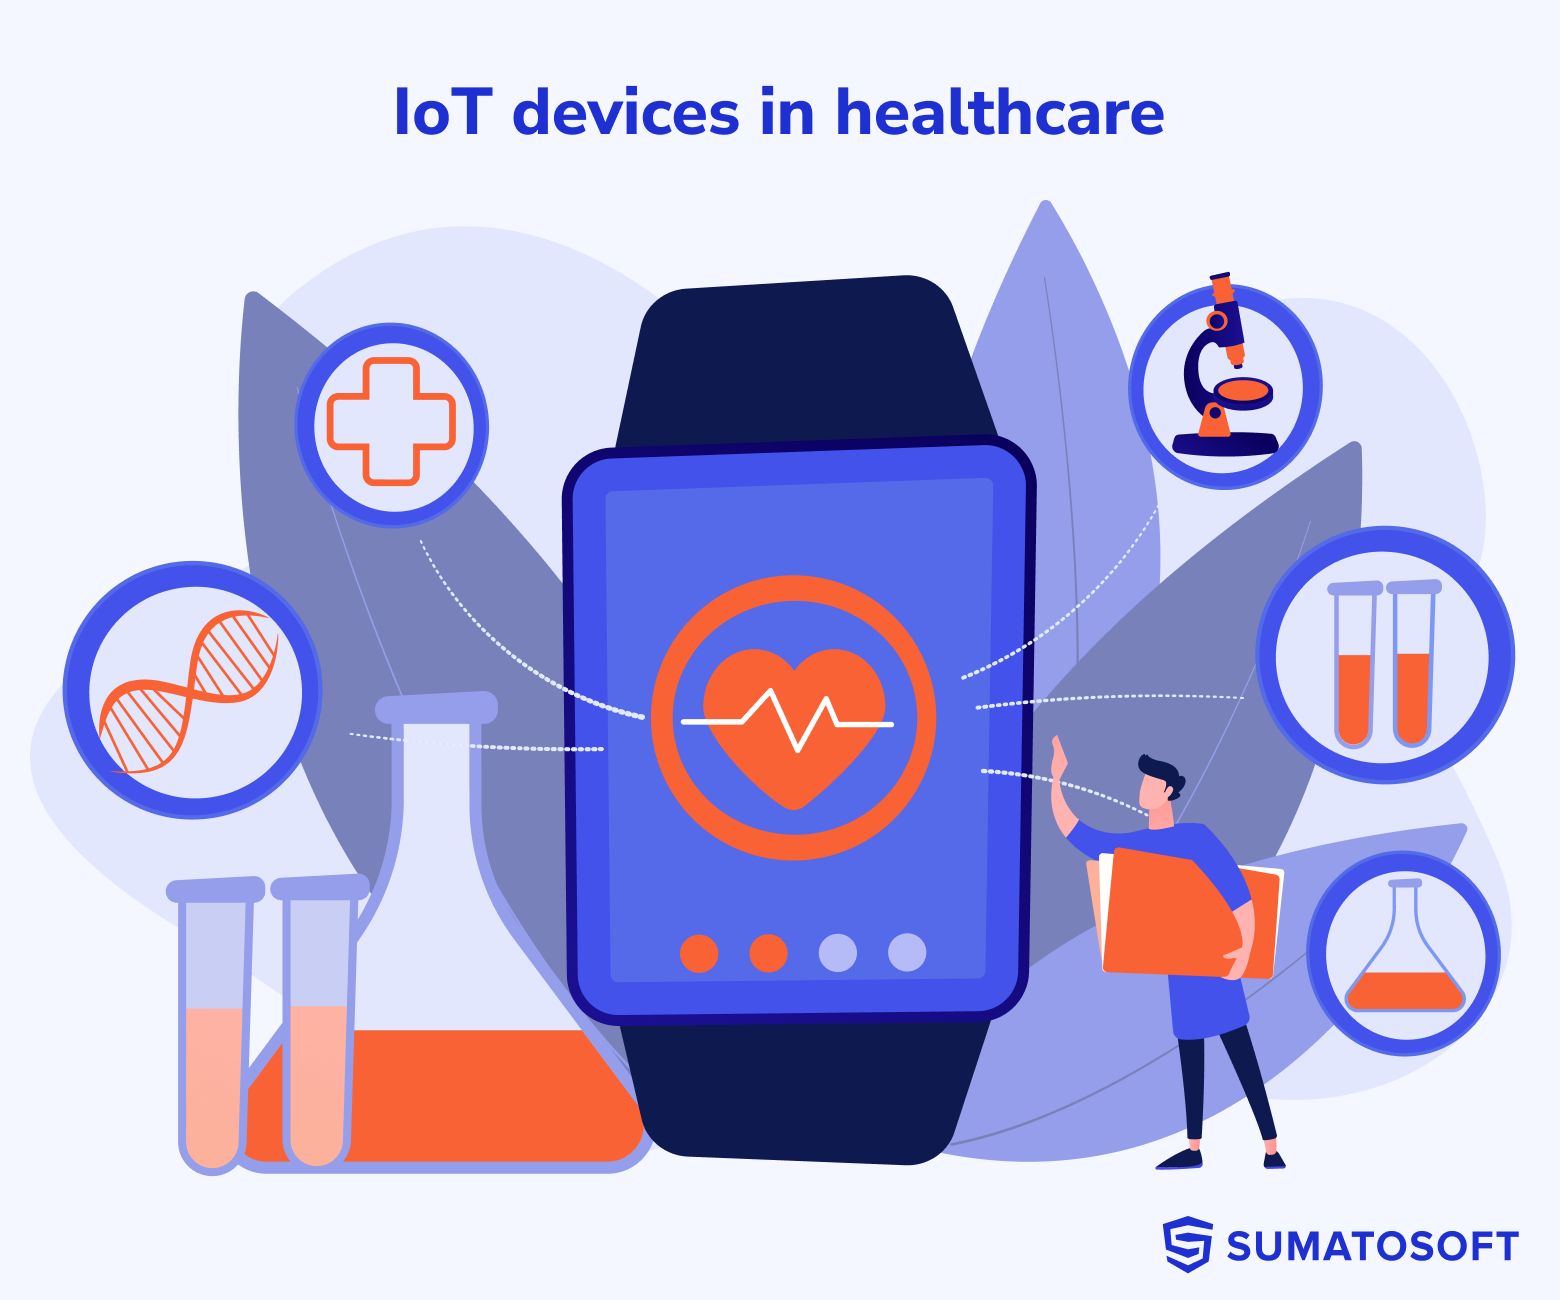 IoT devices in healthcare